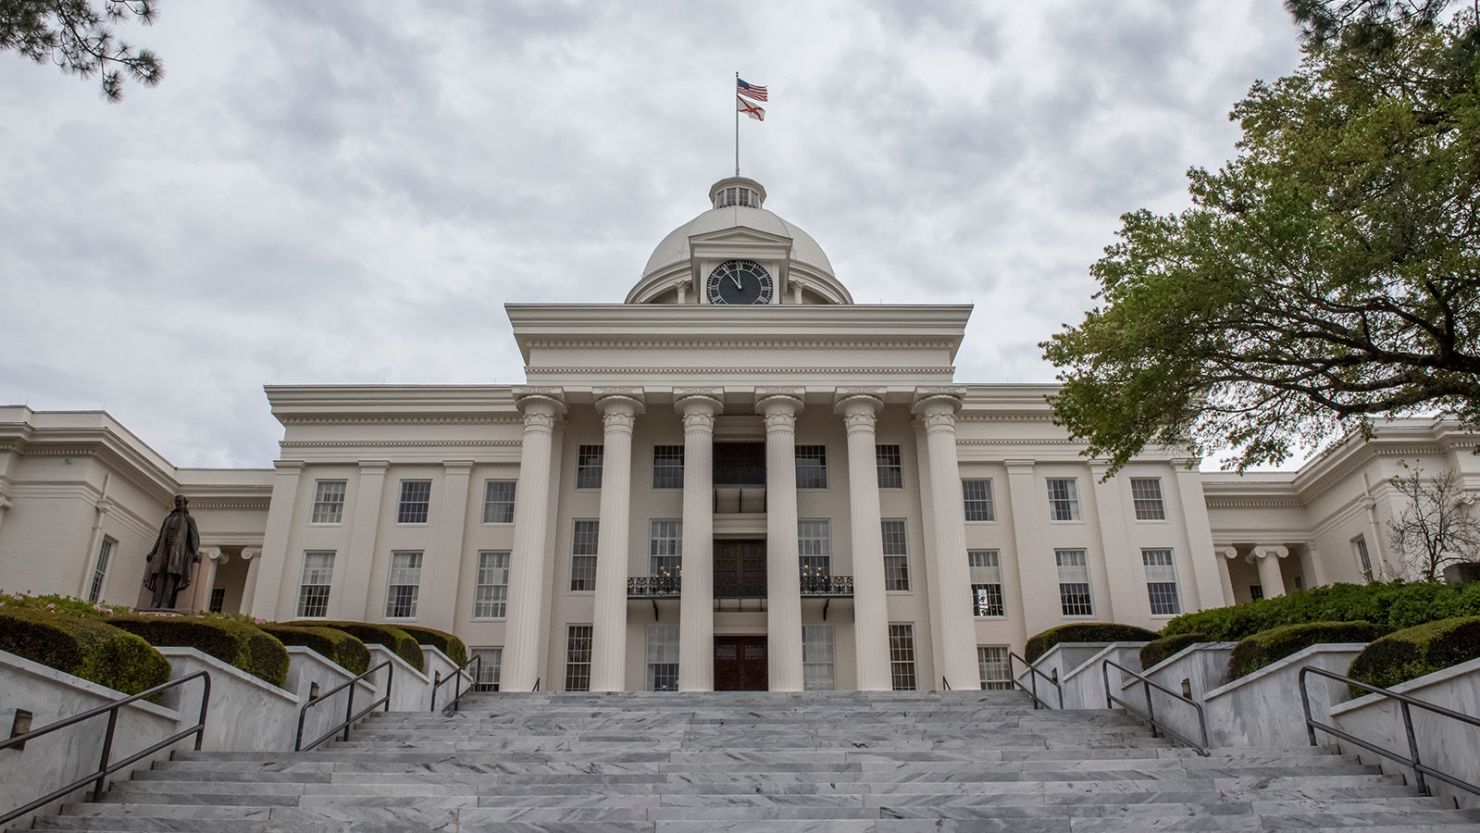 The Alabama State Capitol building.